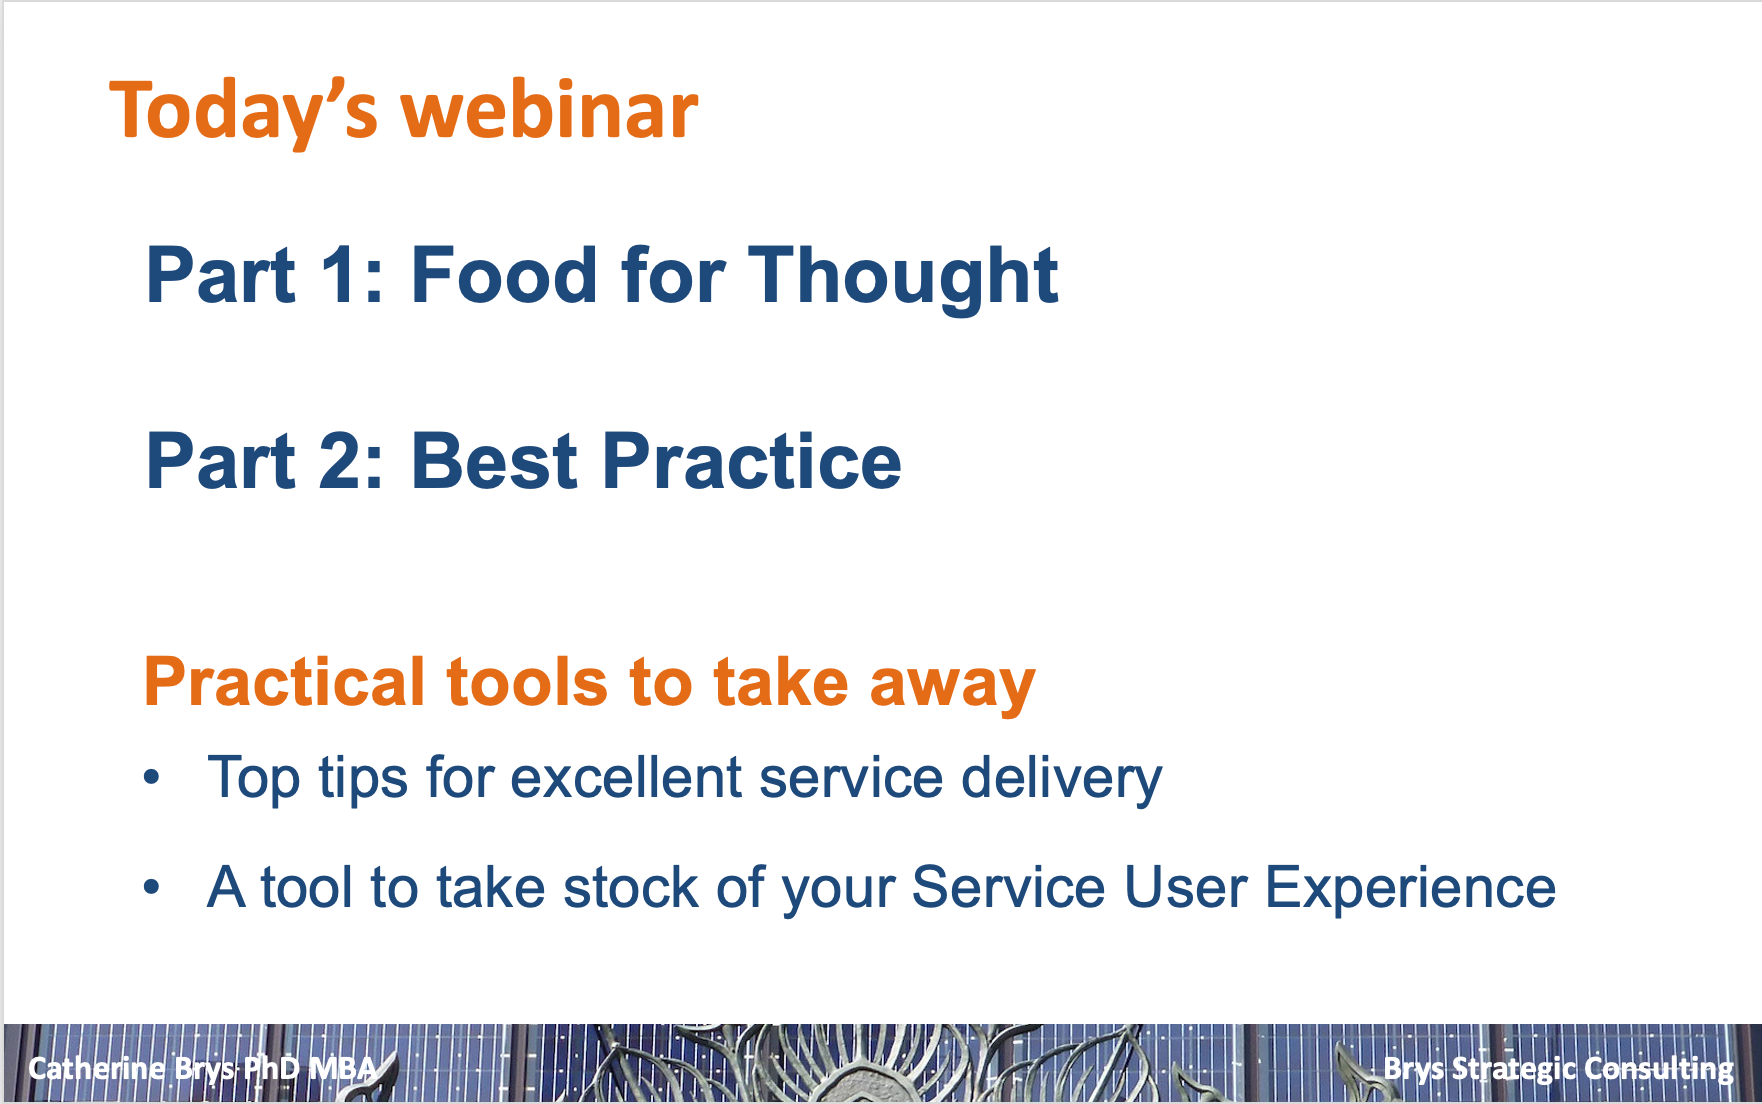 Overview of the webinar contents: Part 1 - Food for Thought; Part 2 - Best Practice and practical tools